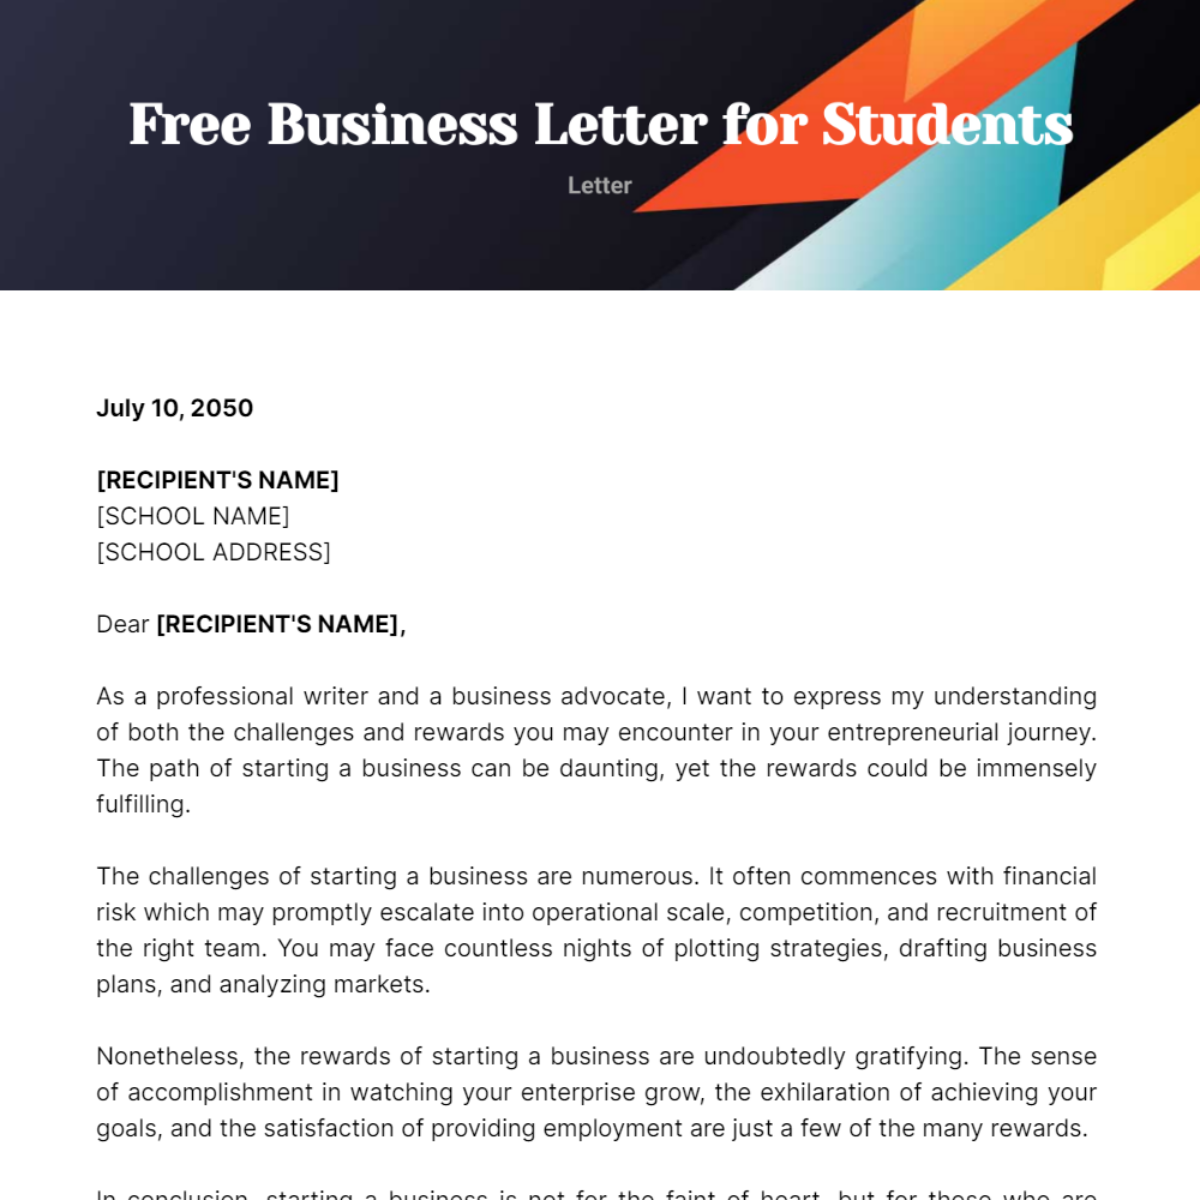 Business Letter for Students Template